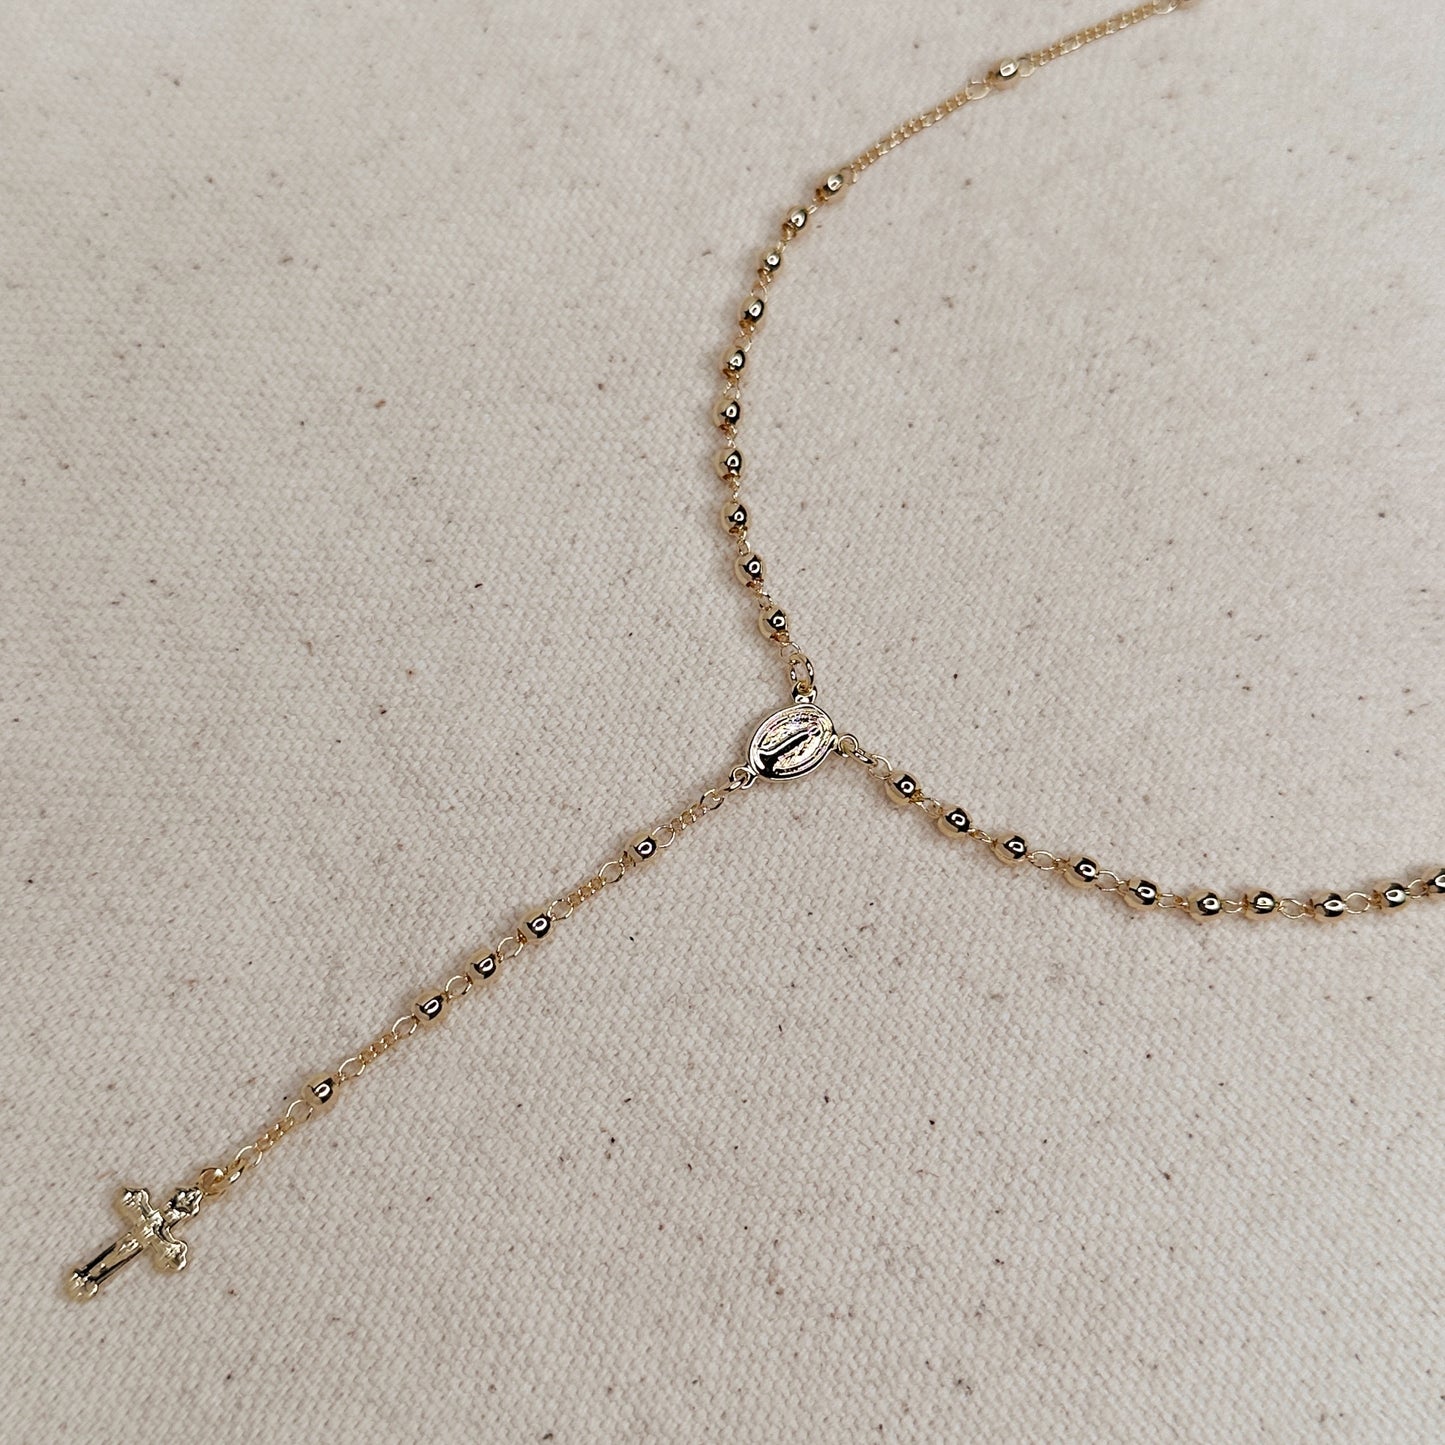 18k Gold Filled Traditional Rosary Necklace